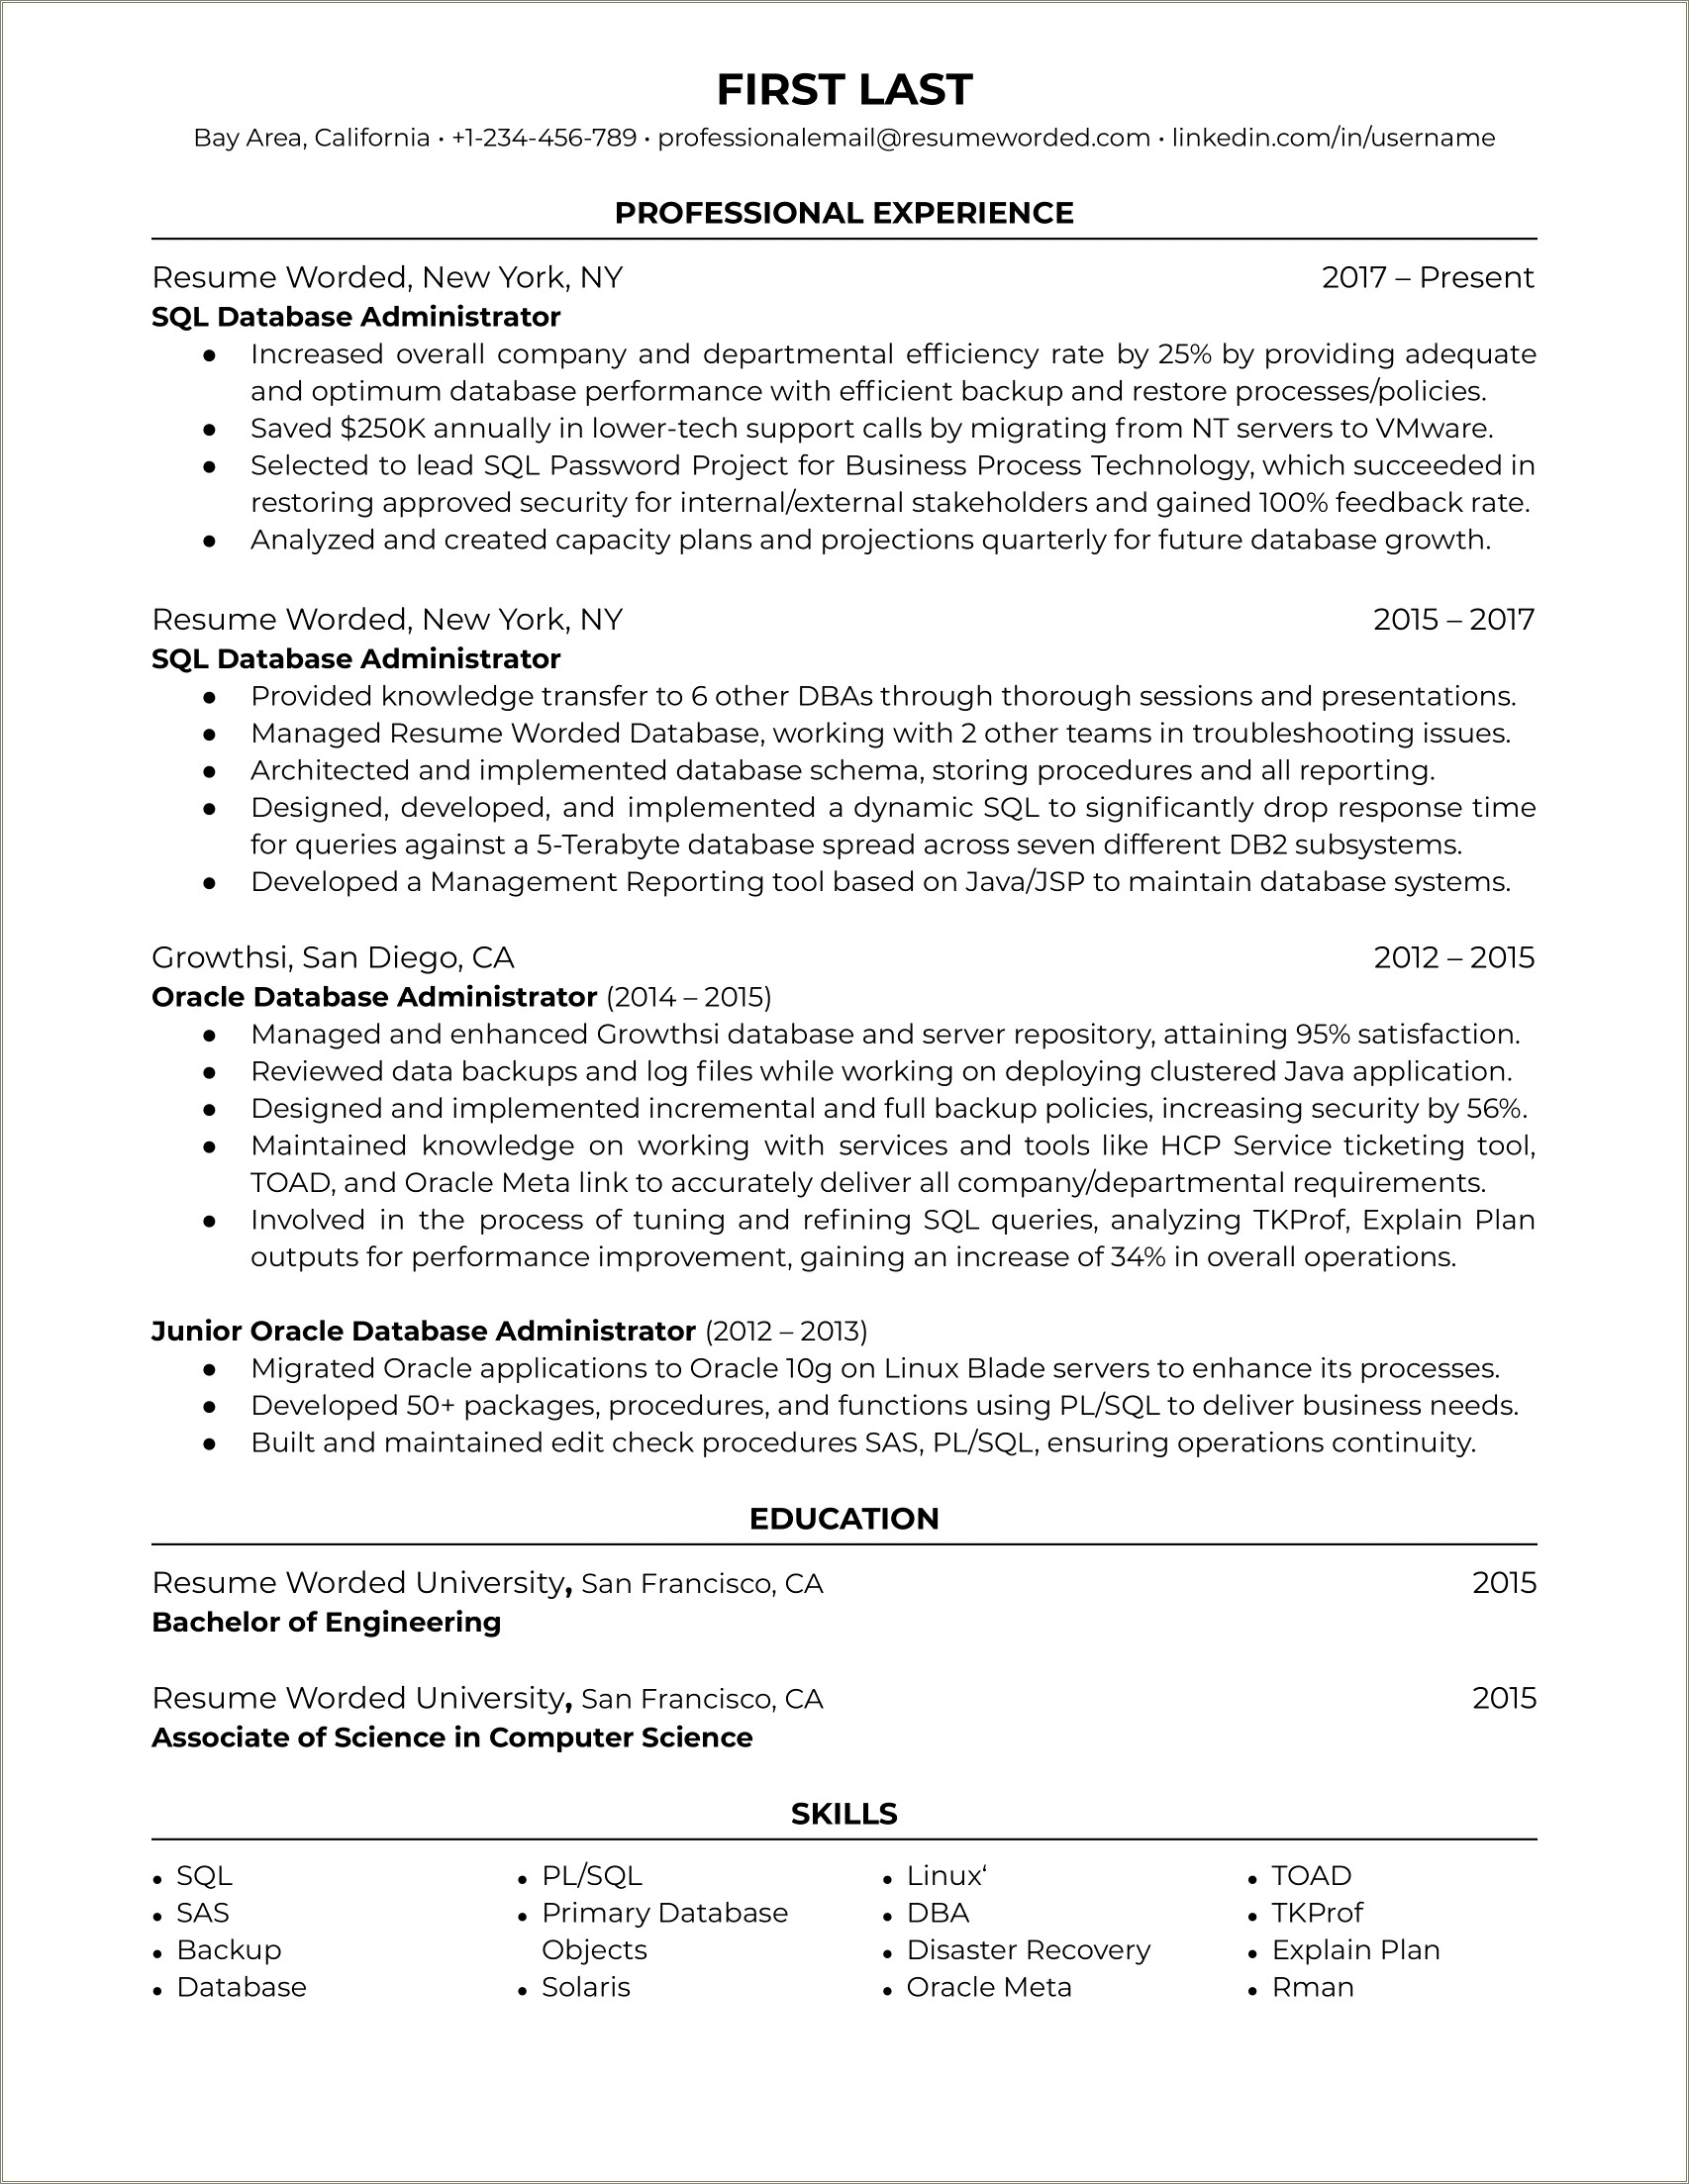 Oracle Database Administrator Resume With 3 Years Experience